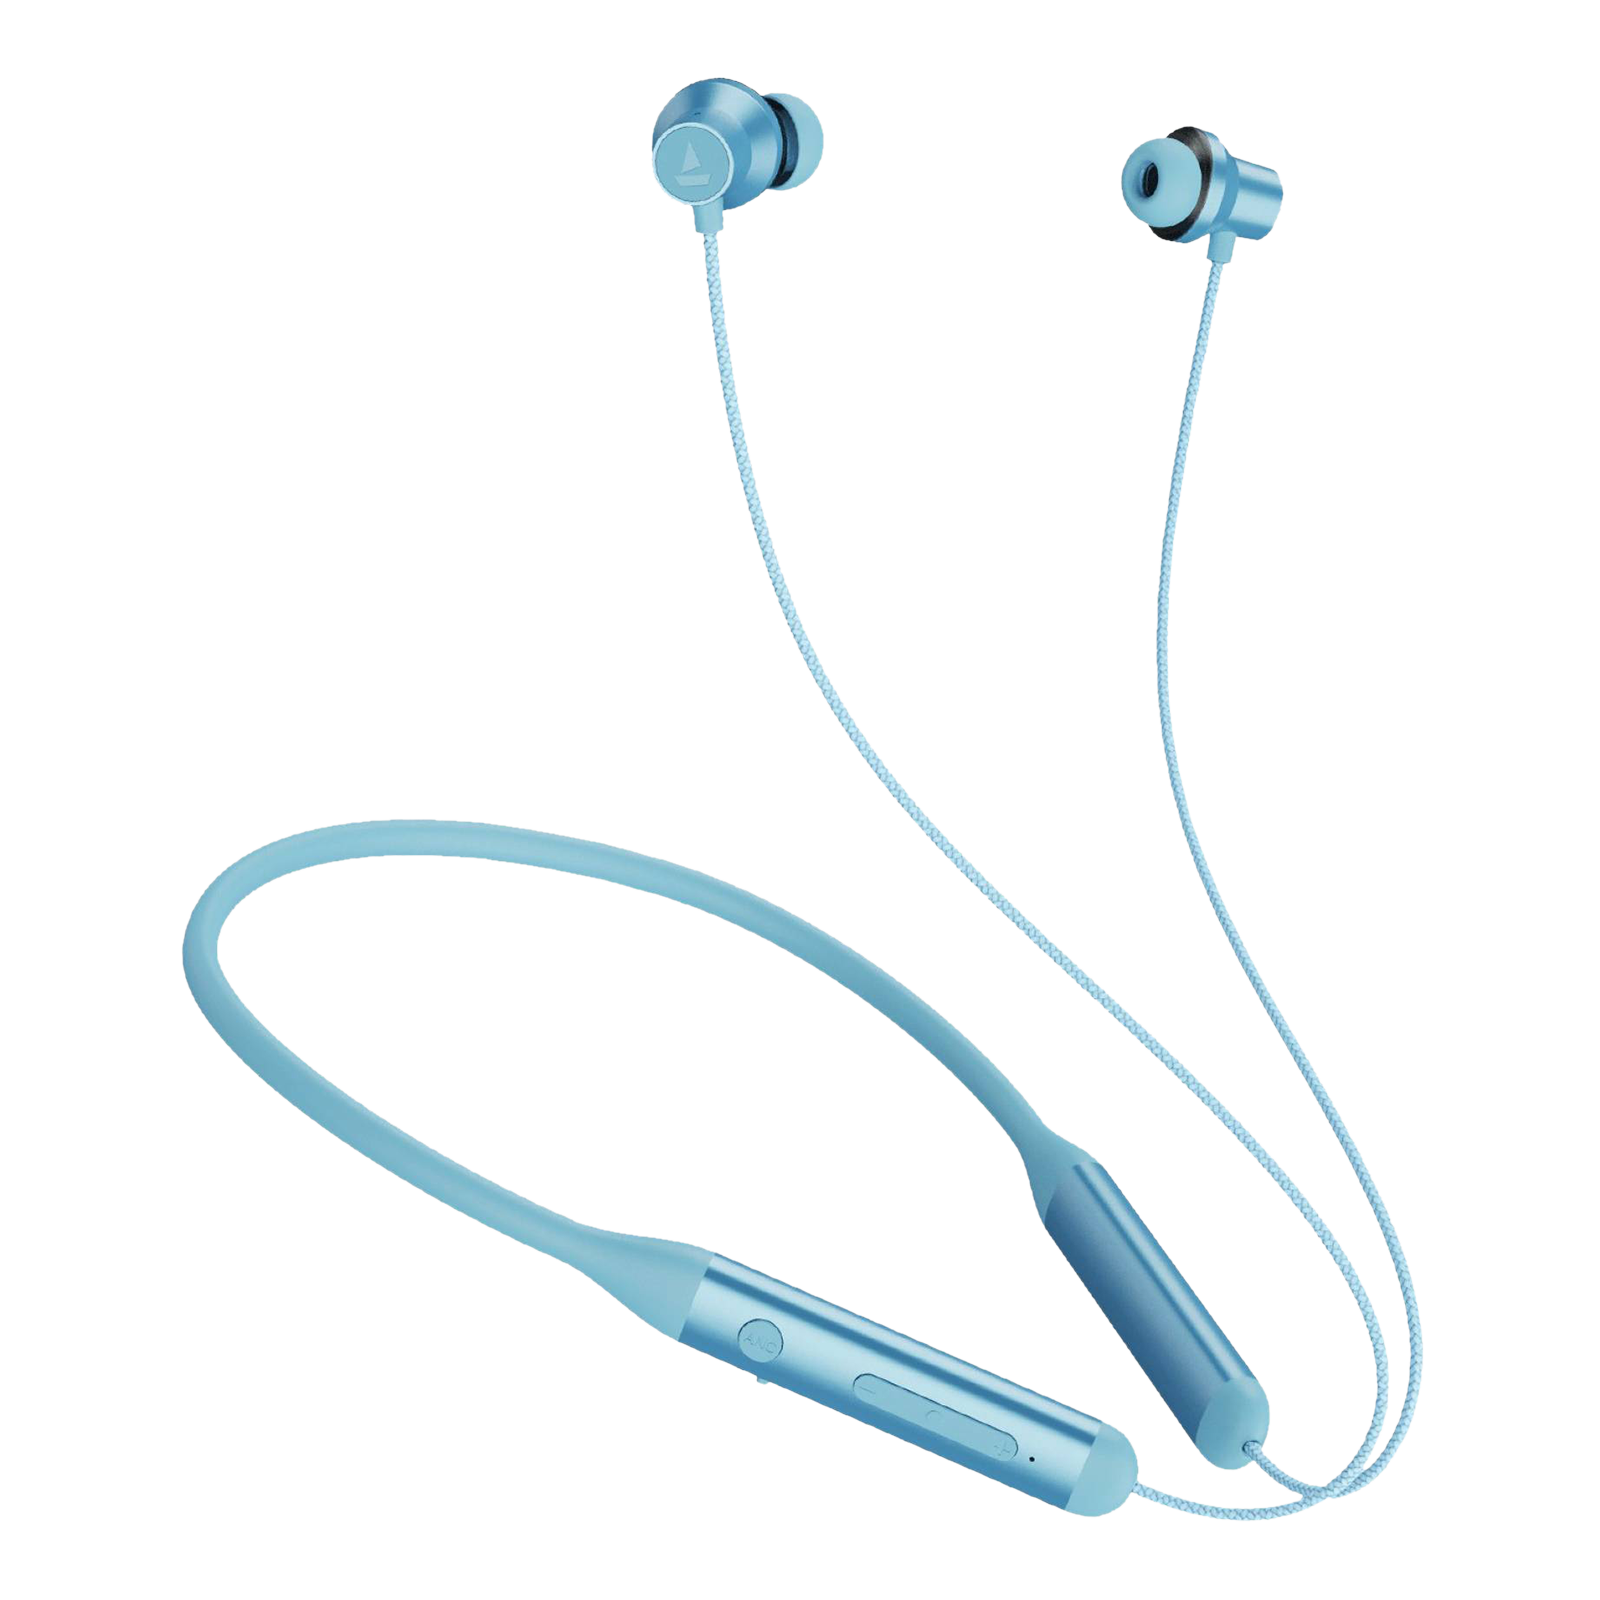 boAt Rockerz 333 Neckband with Active Noise Cancellation (IPX4 Water Resistance, Sweatproof, DIRAC Opteo Technology, Celestial Blue)